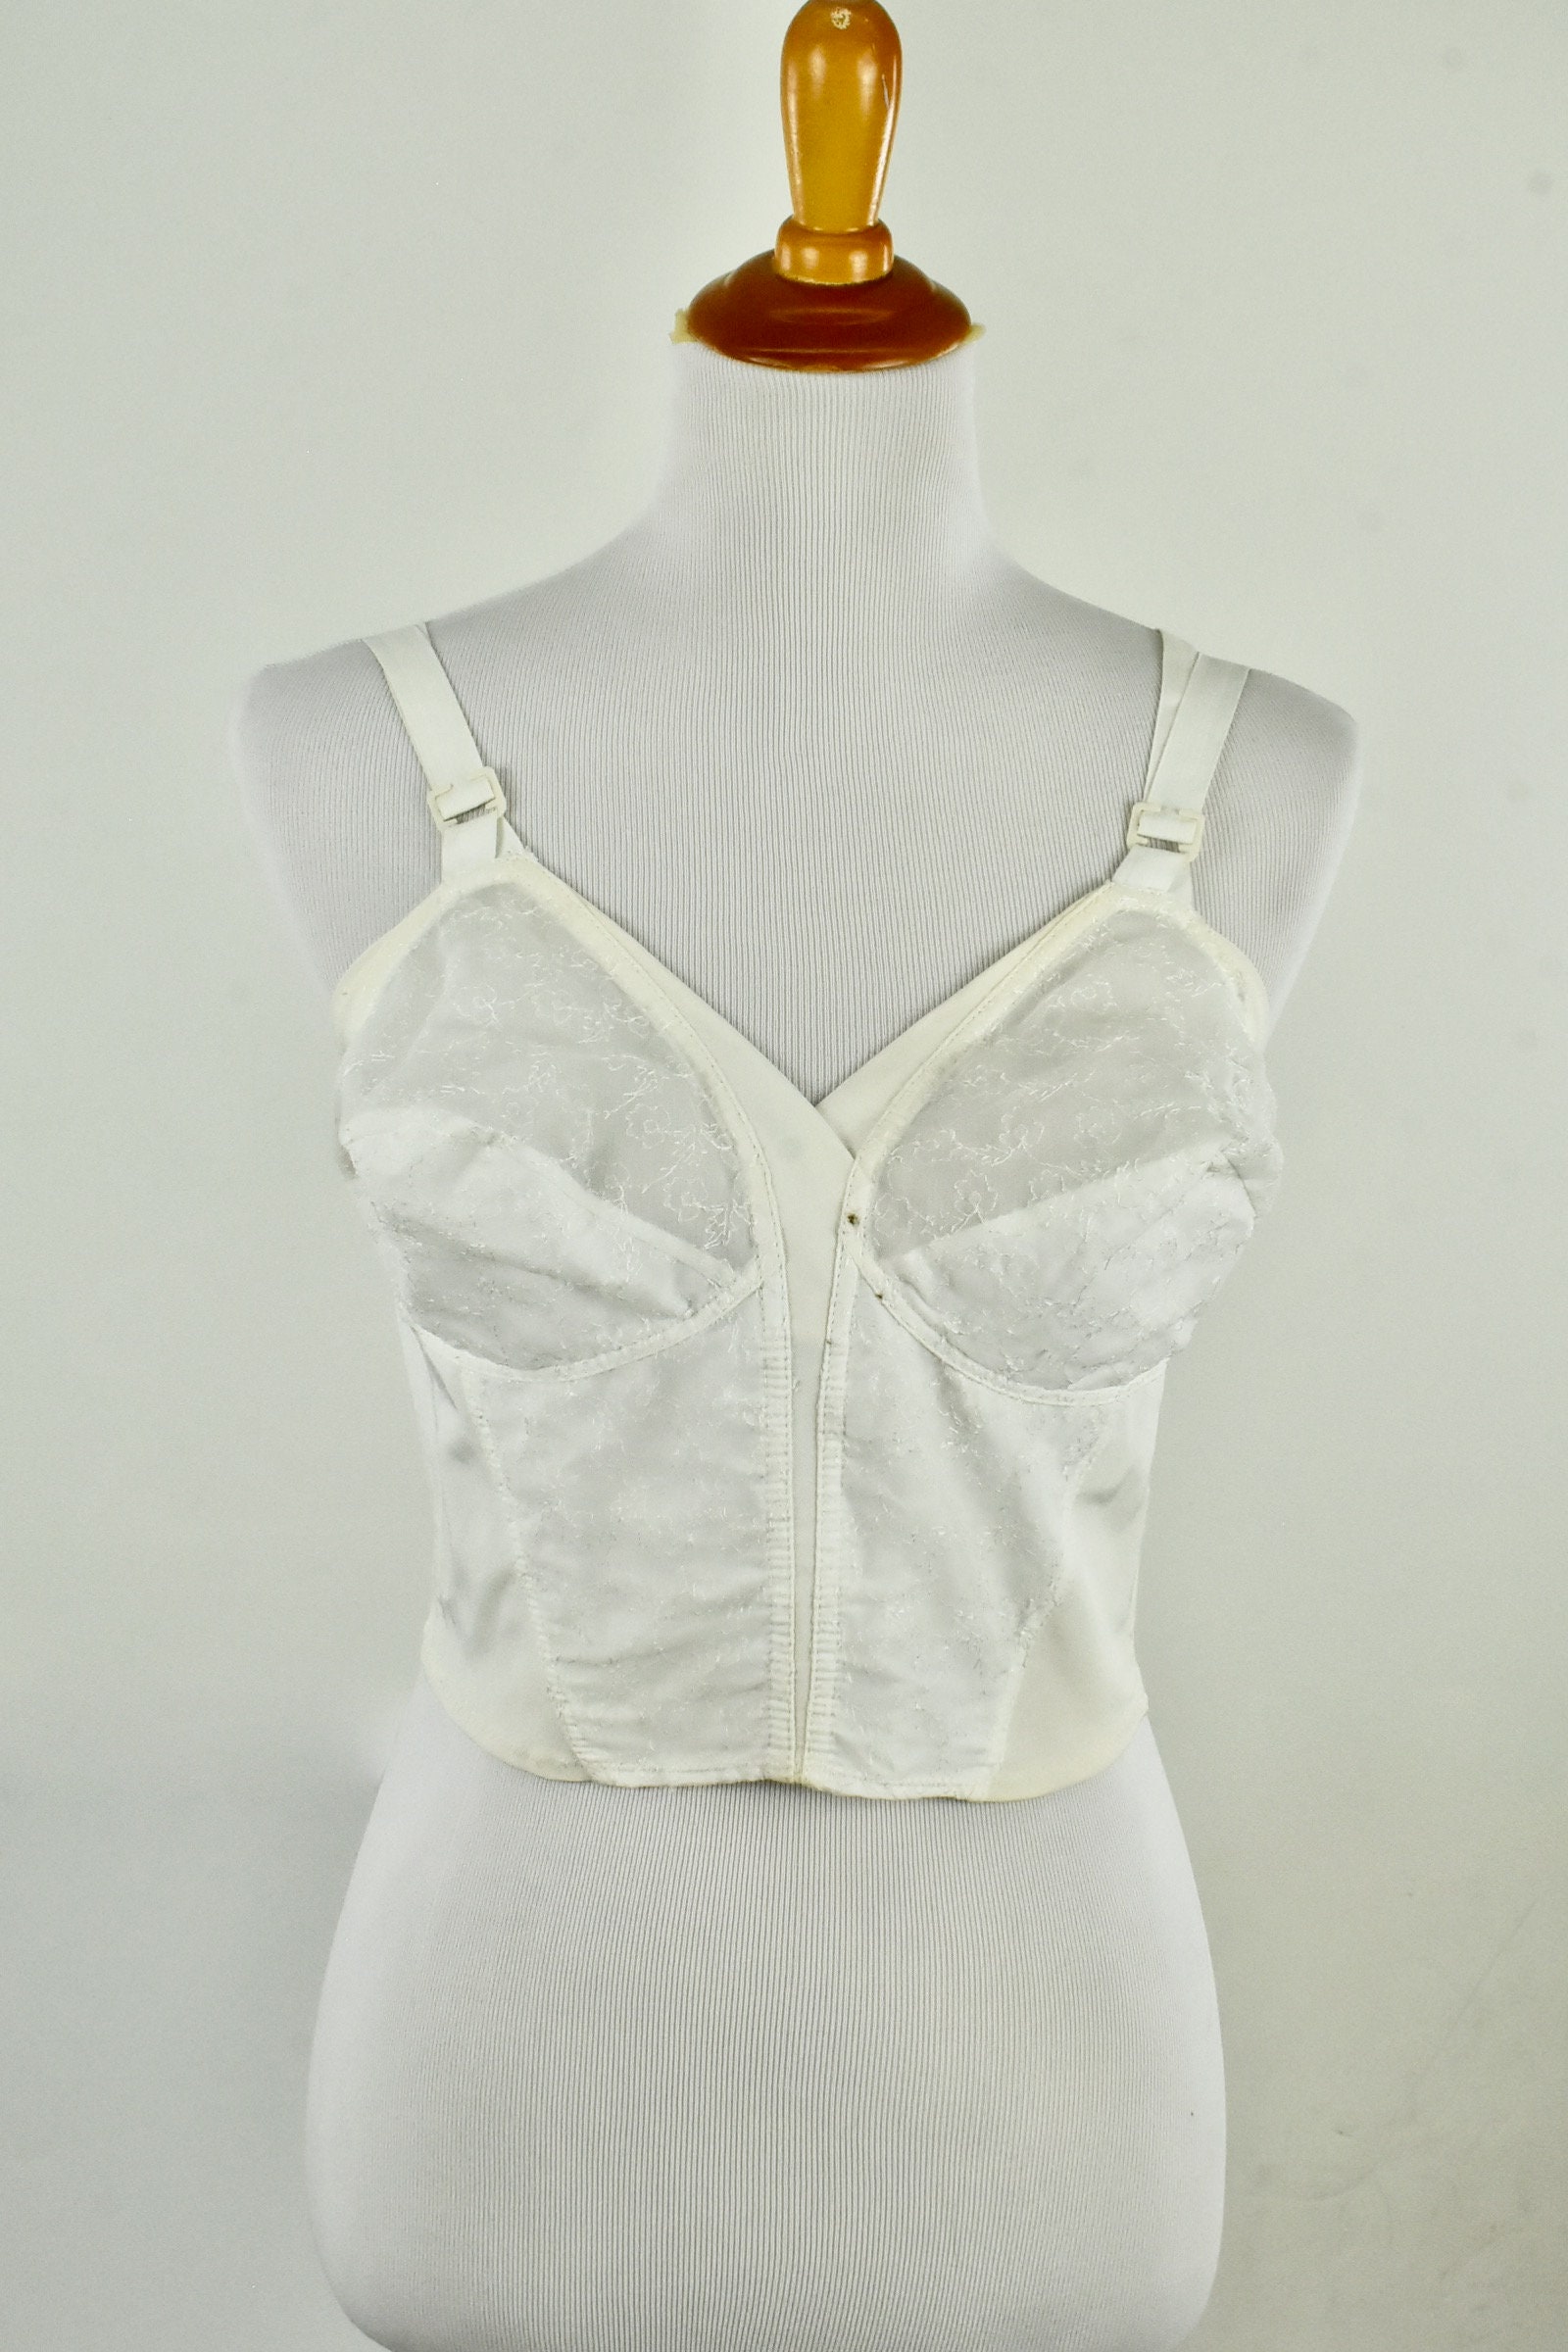 1960s WHITE Long Line Brassiere by Lady Suzanne  40 C -  Canada